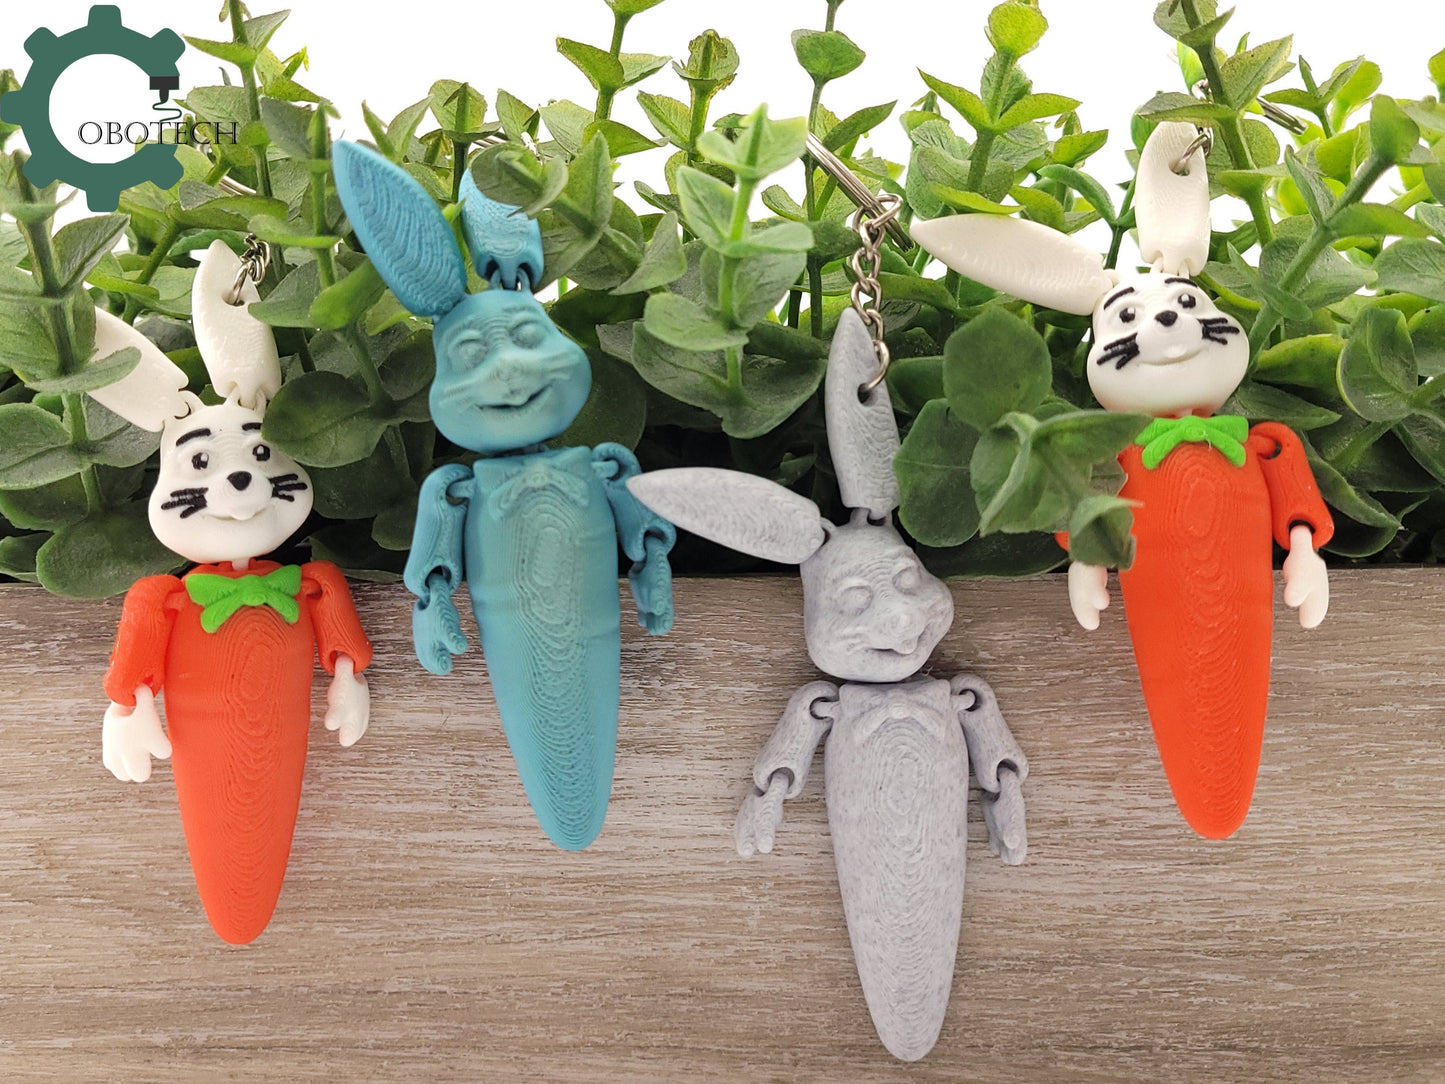 3D Print Articulated Carrot Bunny Keychain by Cobotech, Articulated Toys, Easter Decorations, Unique Gift